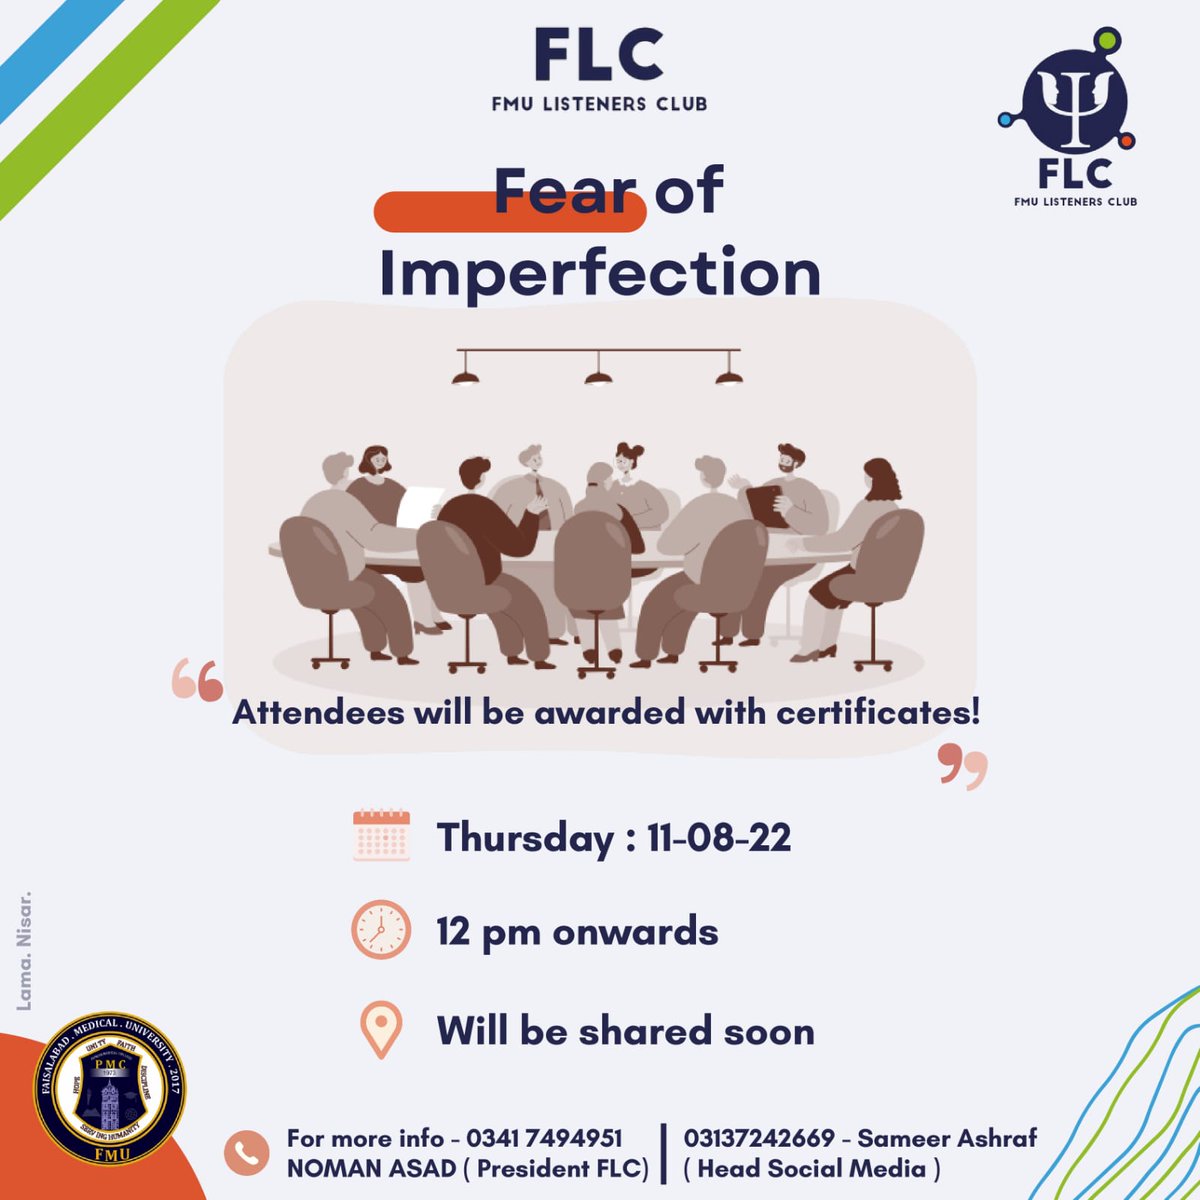 Table talk session of FLC on topic 'Fear of imperfection' will be held on 11 August, thursday from 12pm onward.
Come and join the informative session

#fearofimperfection 
#mentalhealth 
#MentalHealthAwareness